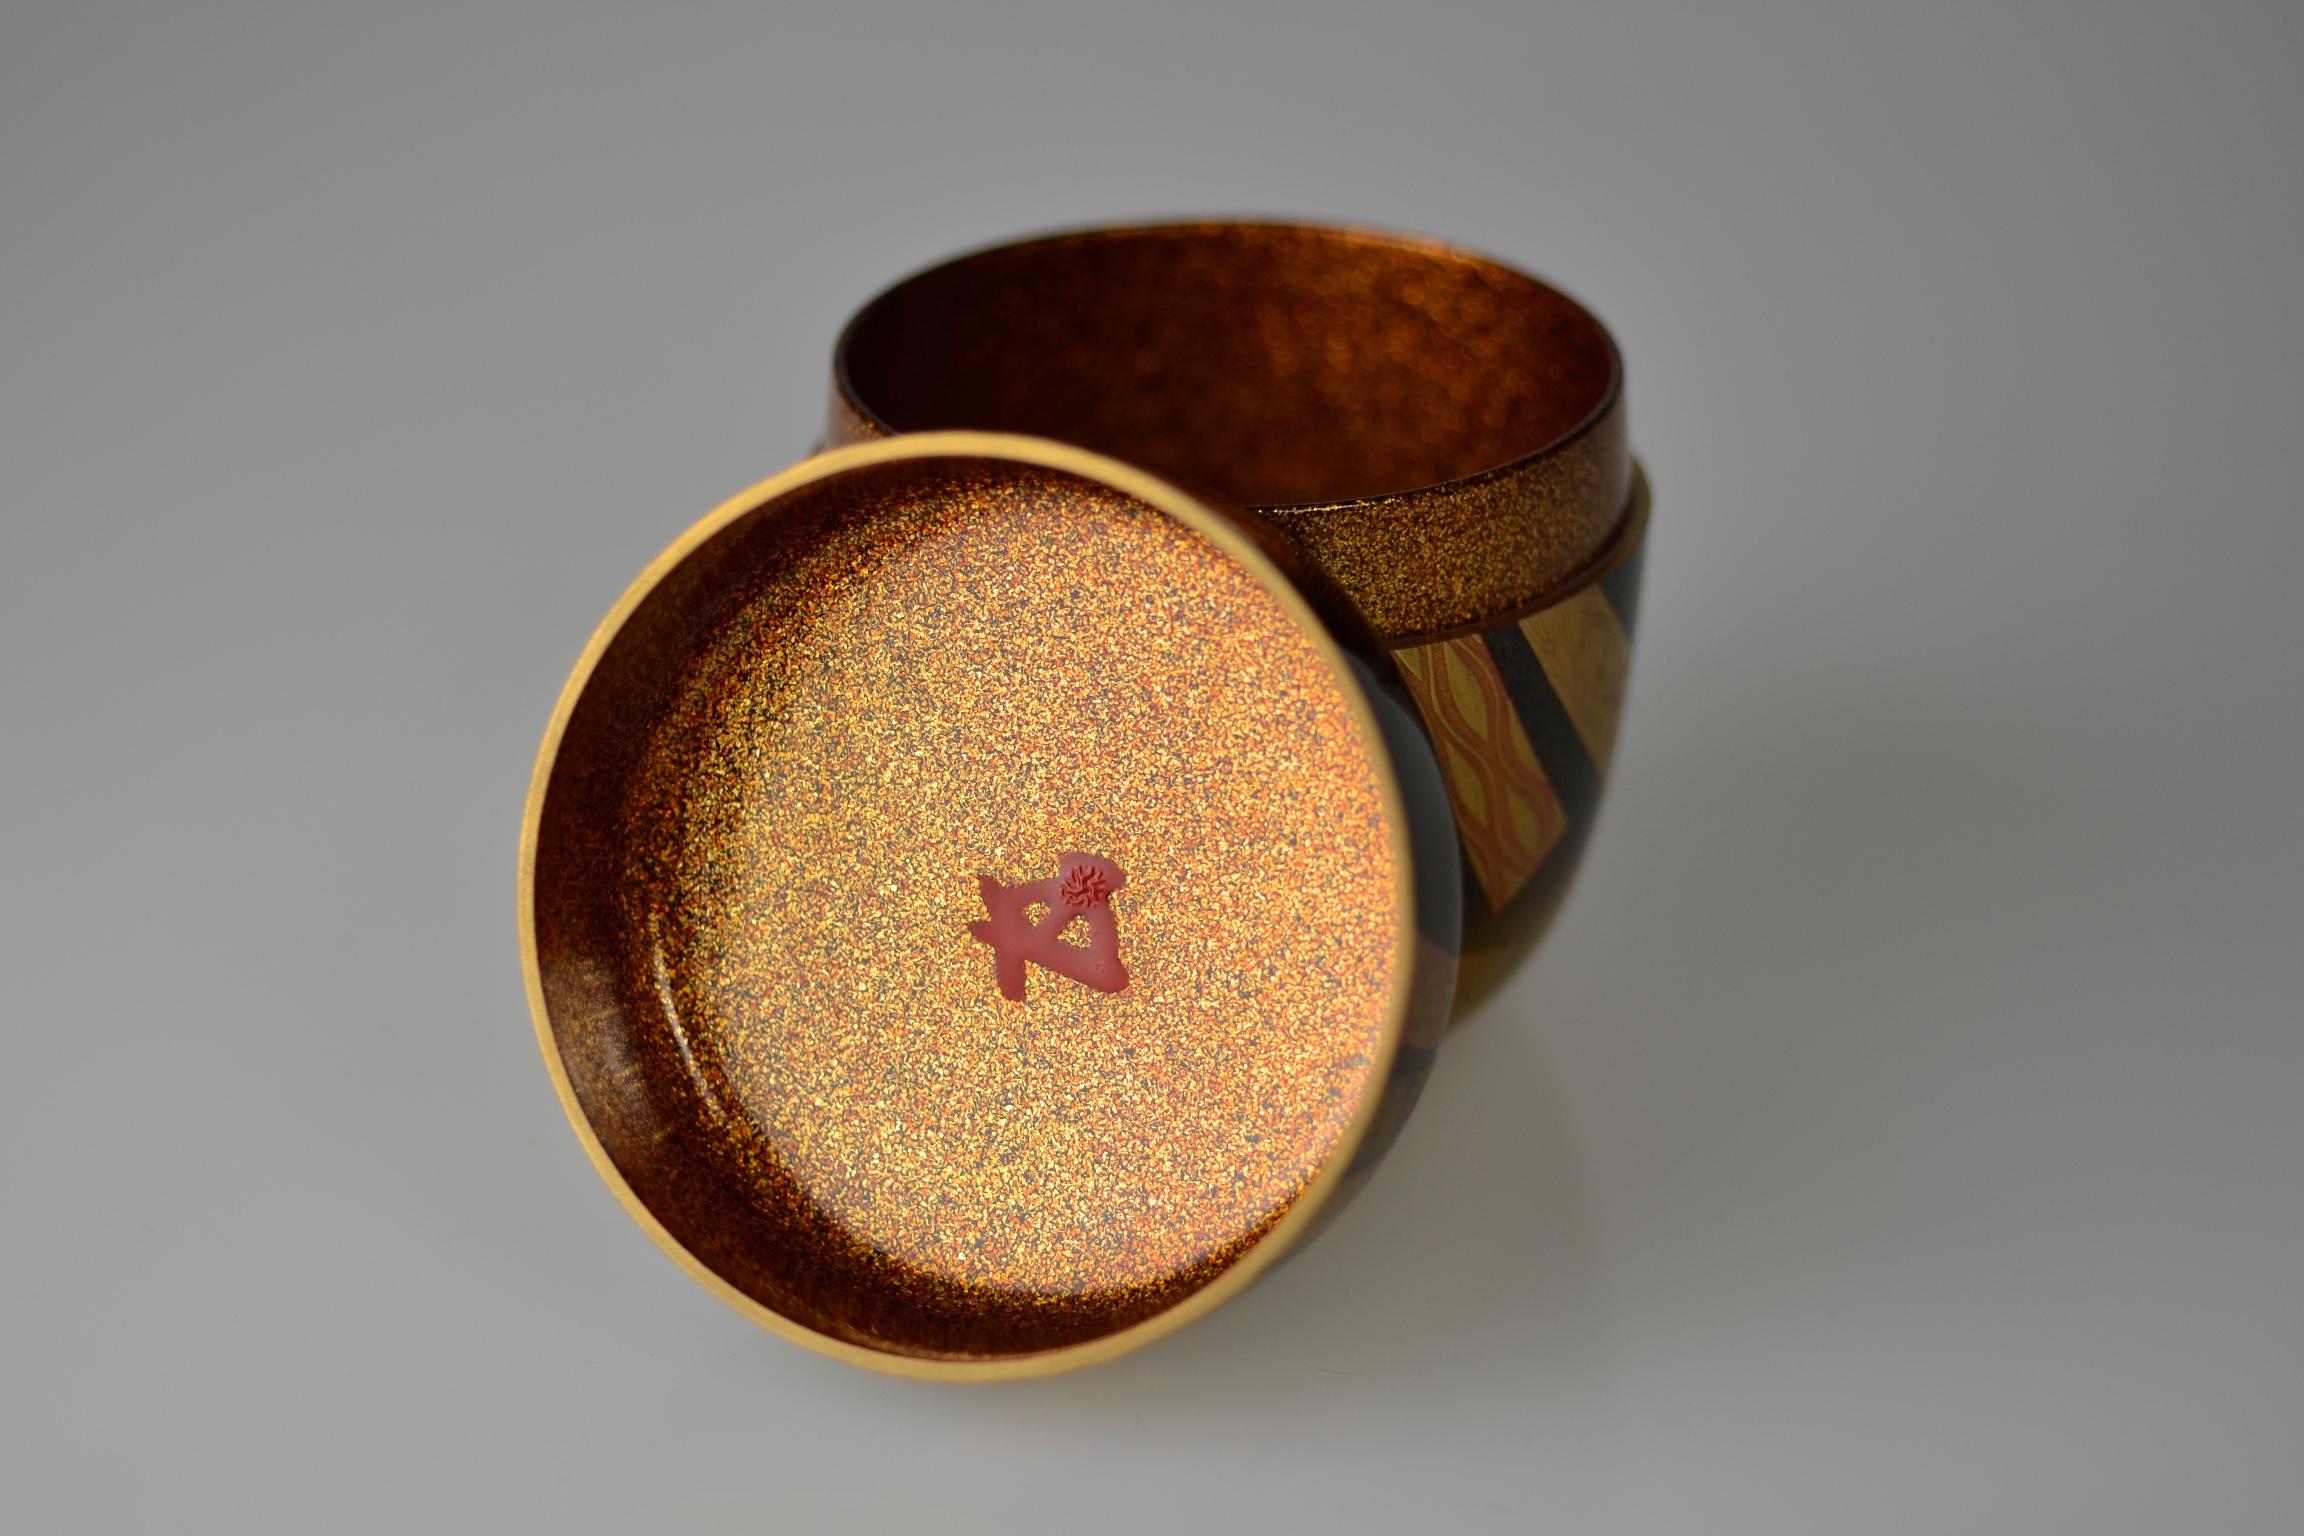 Late 20th Century Gold Lacquer Tea Caddy (Natsume) with festive knot by Ichigo Itcho (1898-1991) For Sale